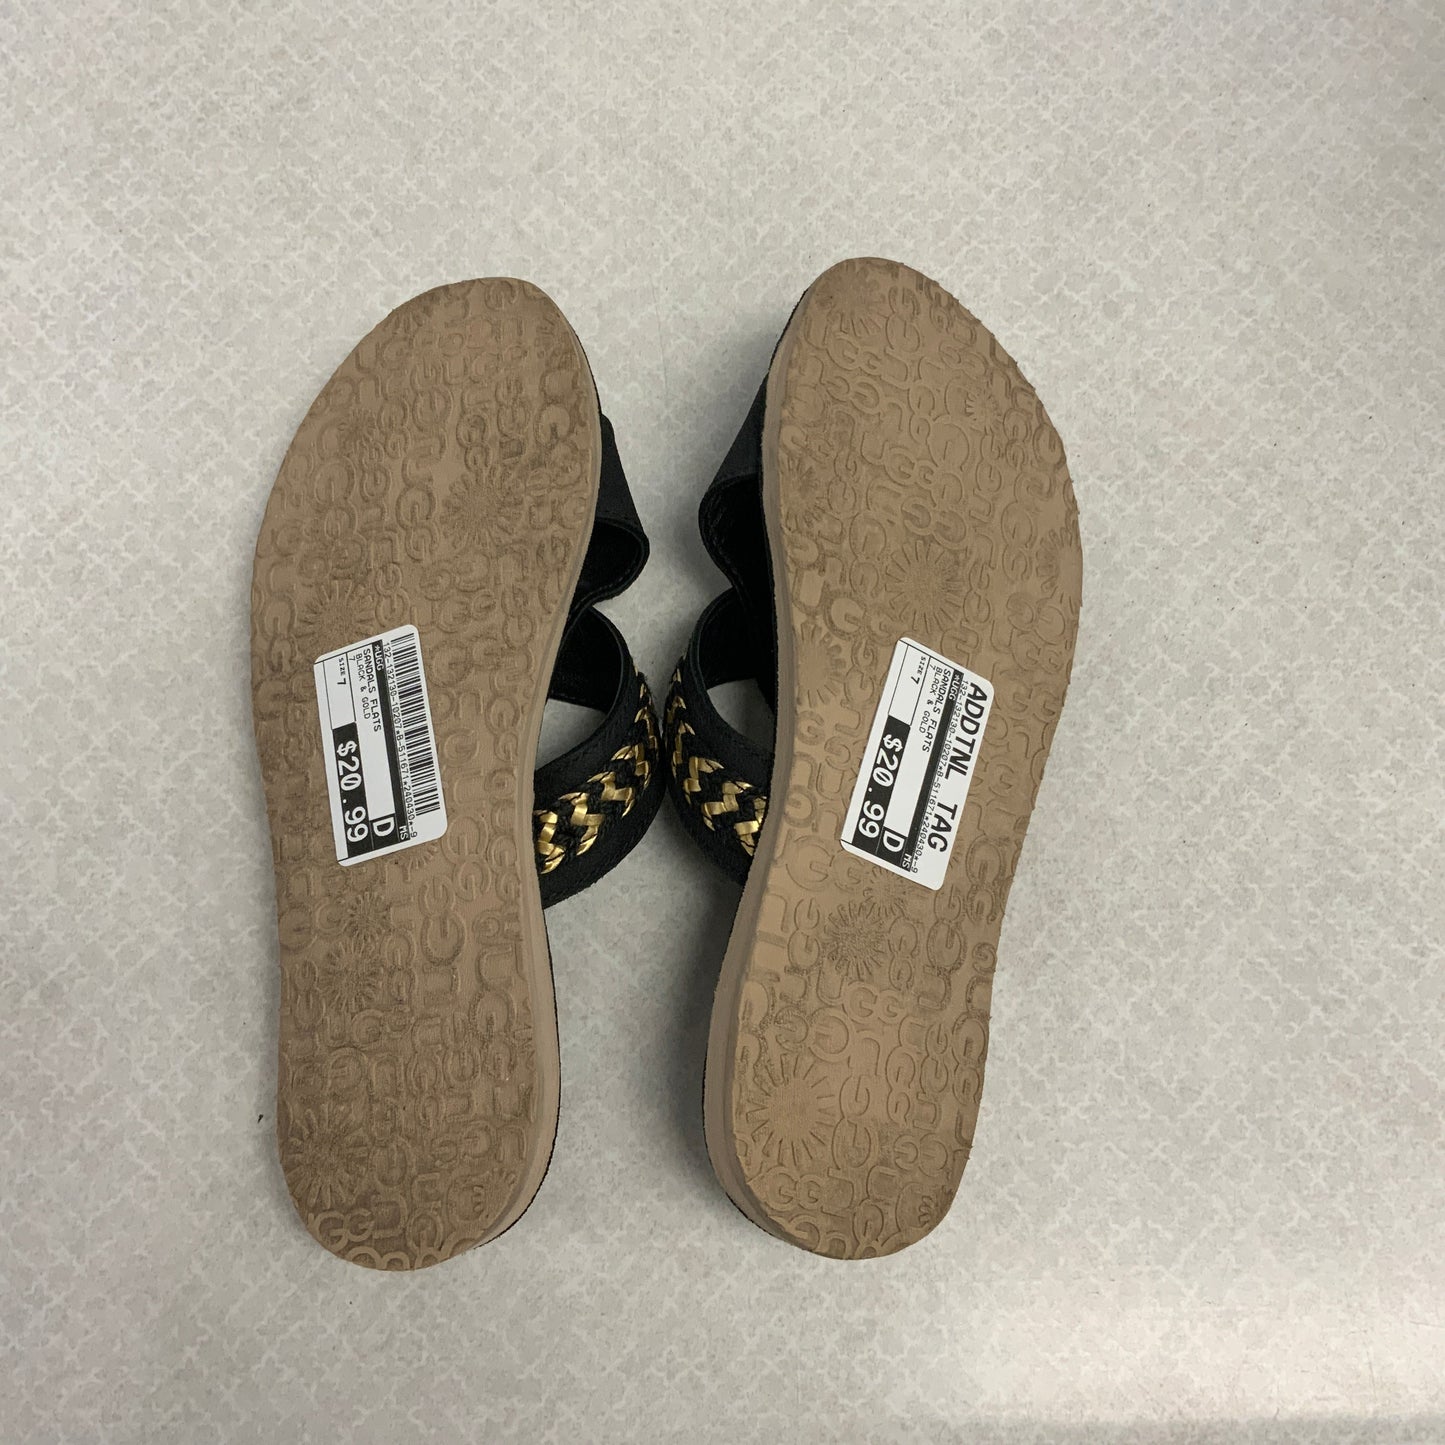 Sandals Flats By Ugg  Size: 7